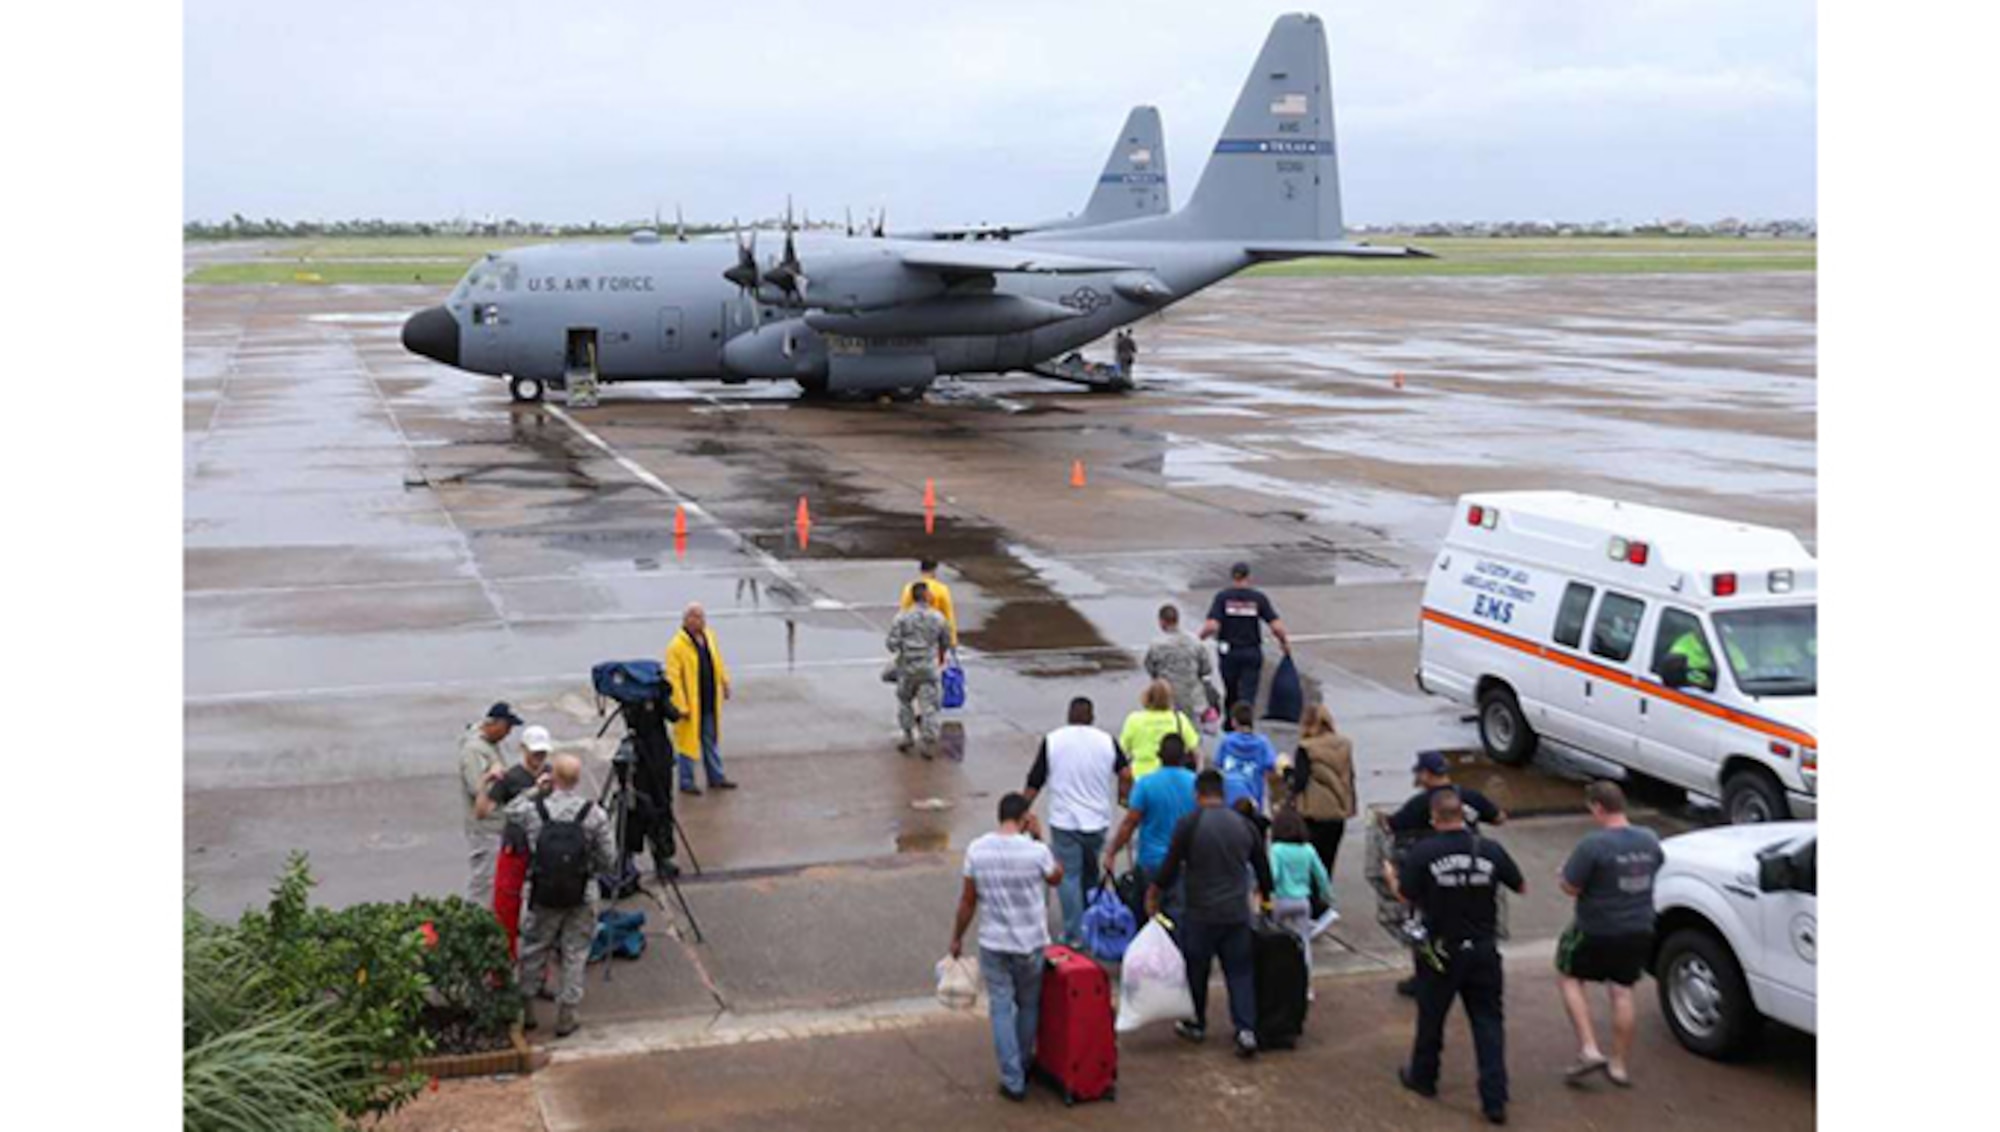 Dickinson flood evacuees boarding an airplane at Scholes International Airport on Monday, August 28, 2017, in Galveston. Texas Air National Guard planes were taking these flood evacuees to other cities after they spent Sunday night at a Galveston shelter, an example of how citizen airmen help during disasters.